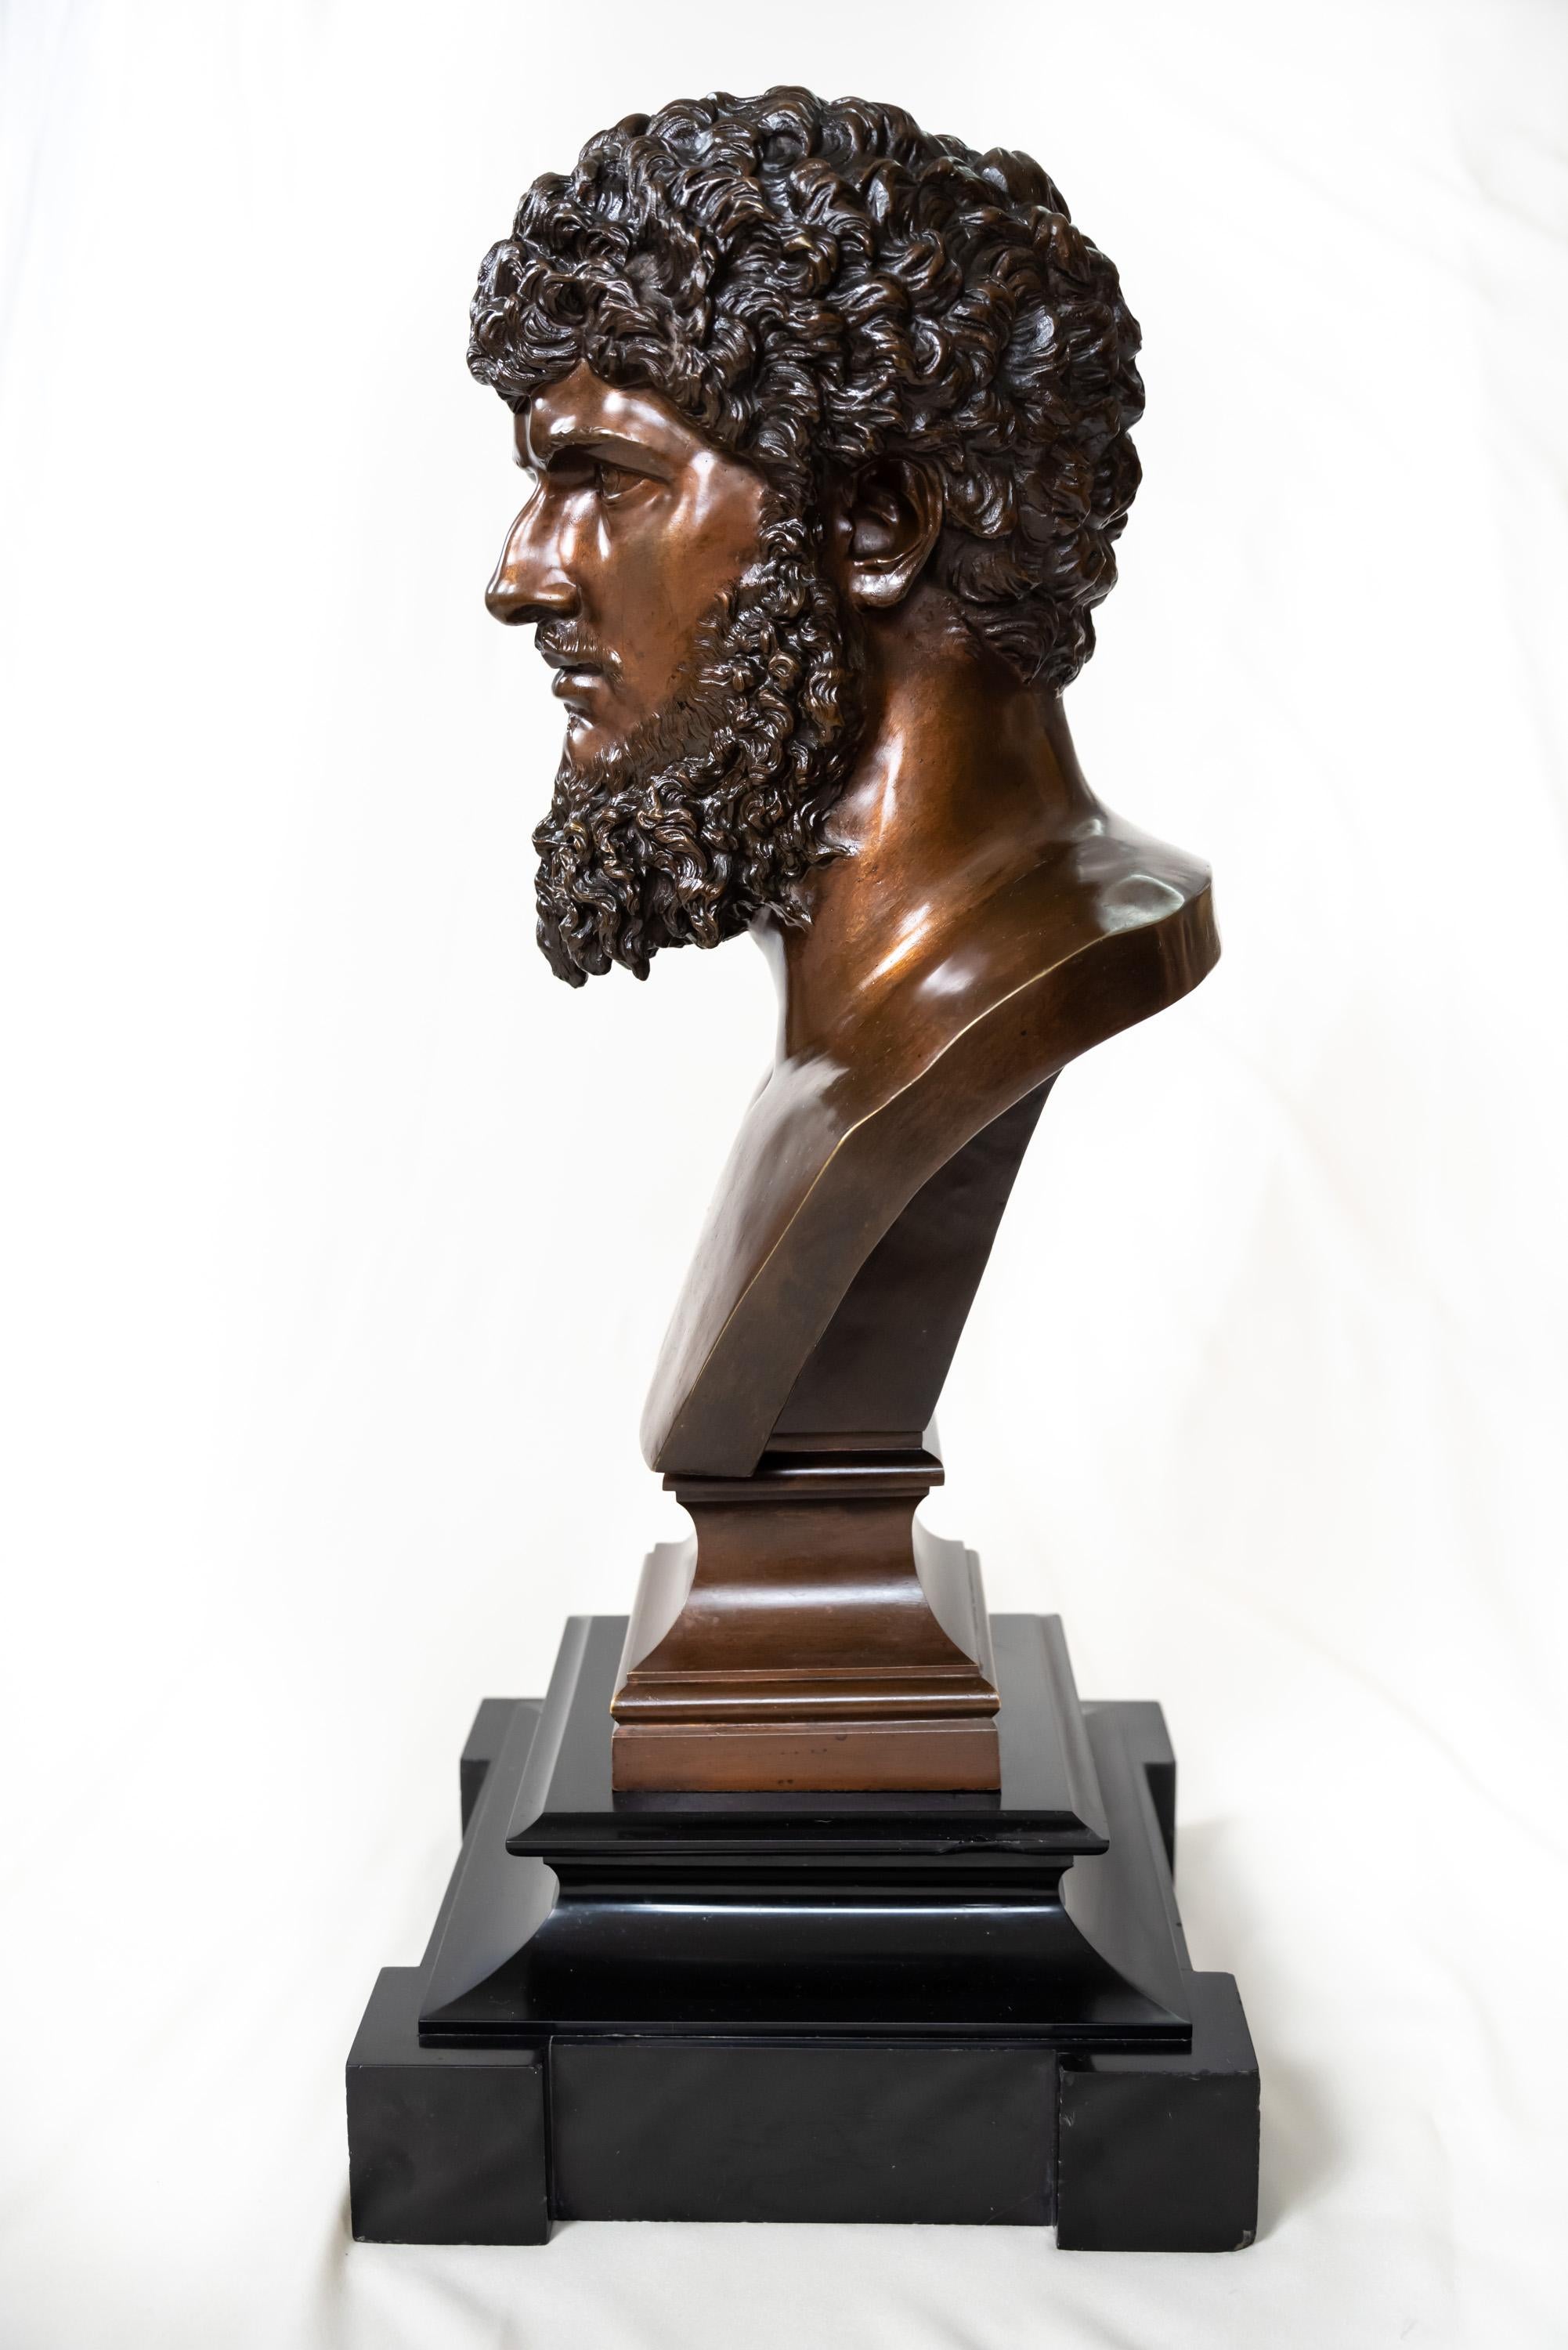 Lucius Verus was Co-Emperor with Marcus Aurelius during the first nine years of Marcus’ reign. A handsome guy, his image became popular during and after his imperial days. This bust is a late-nineteenth-century reproduction of the marble Roman